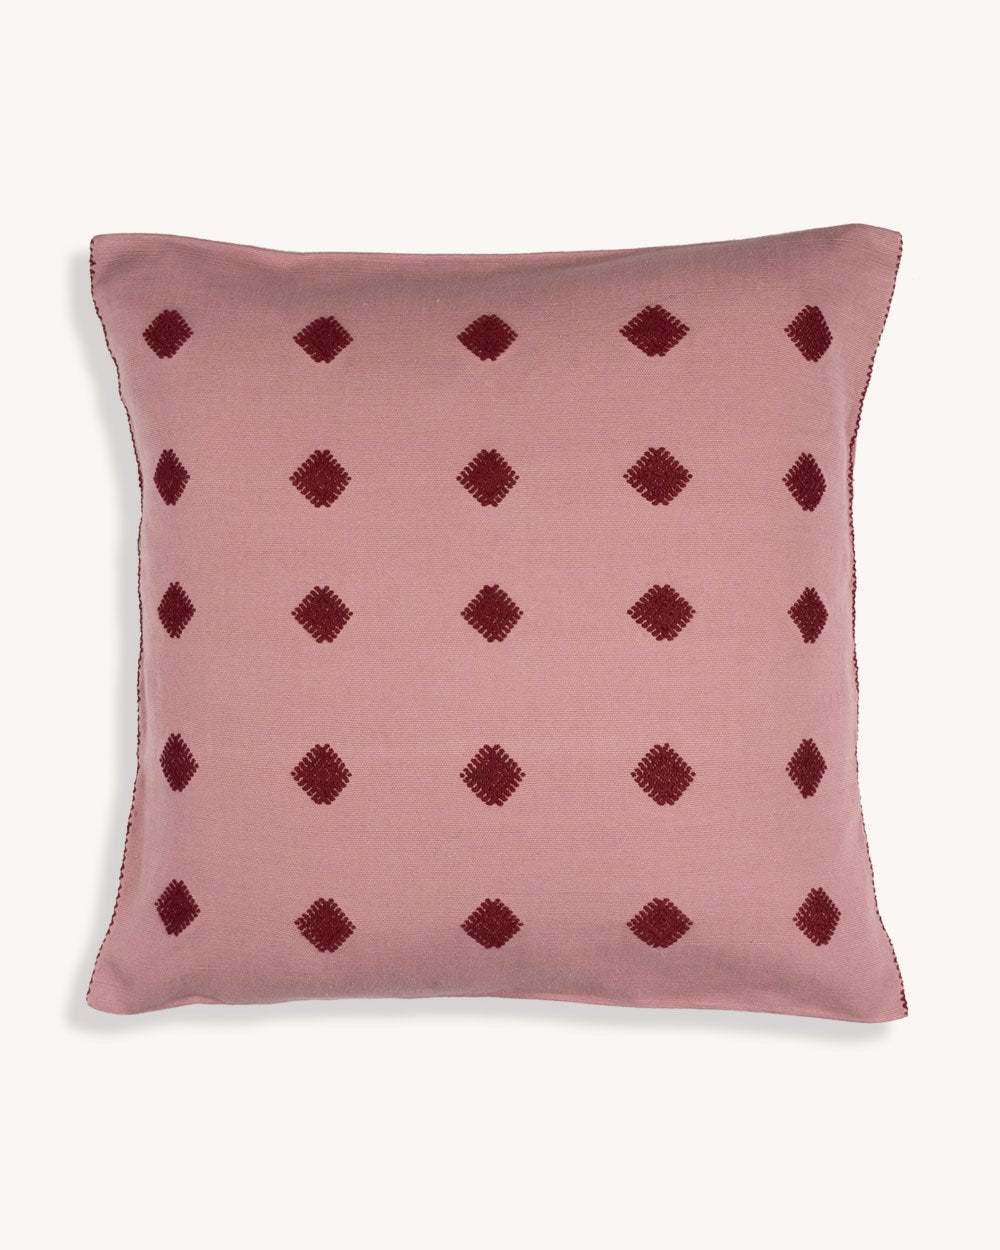 Routes-Path-of-the-sun-cushion-pink-front.jpg